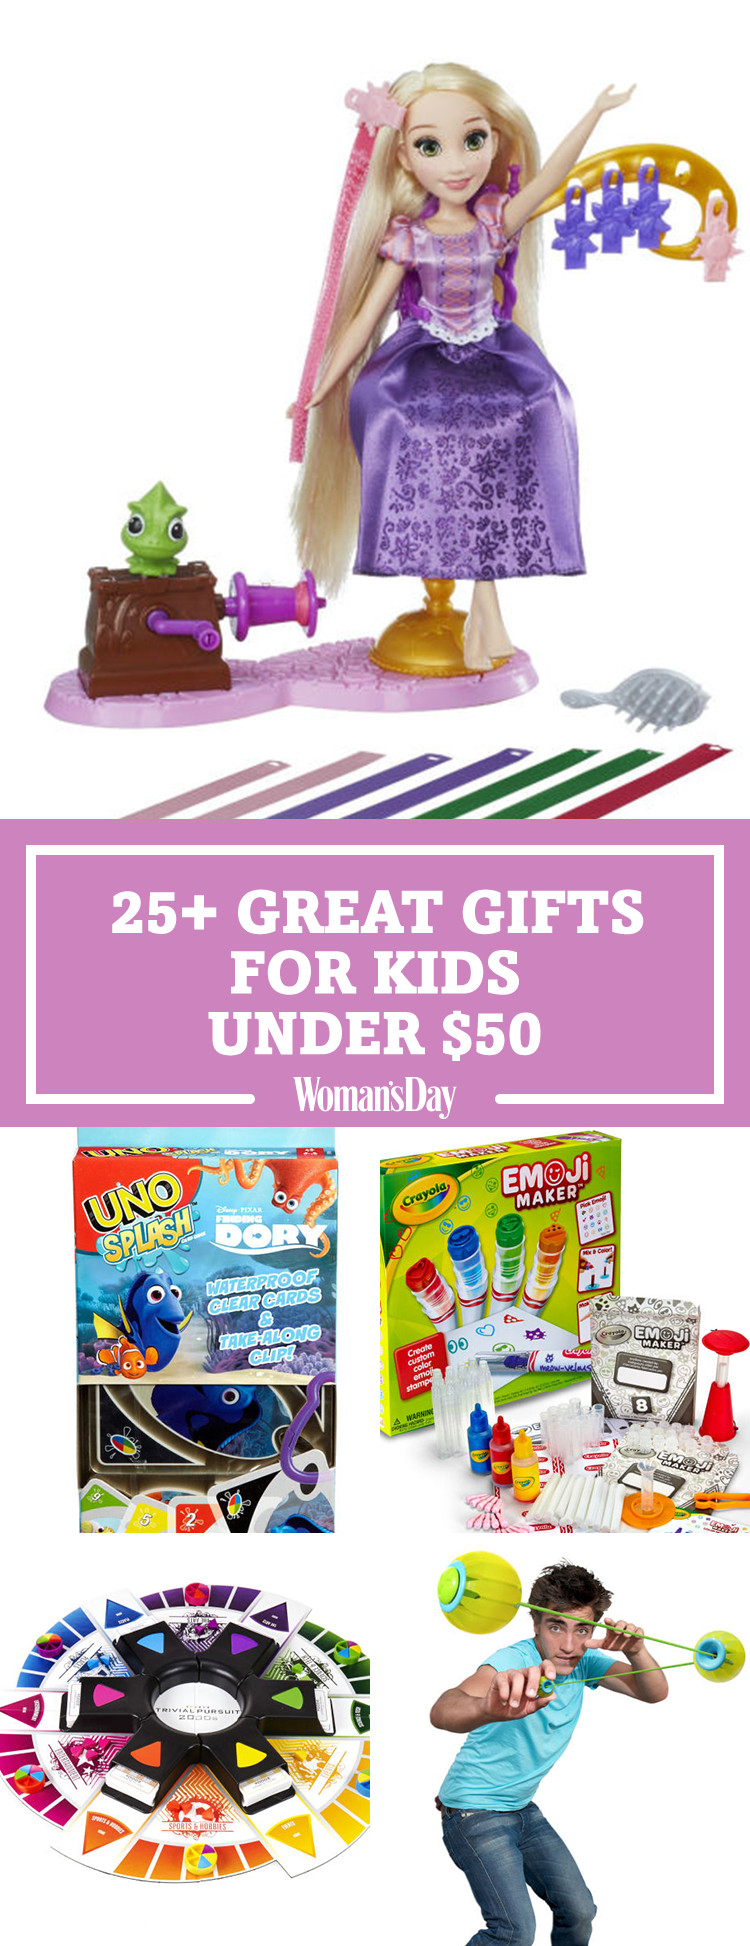 Top Gift Ideas For Kids
 30 Best Christmas Gifts for Kids 2017 Holiday Gift Ideas